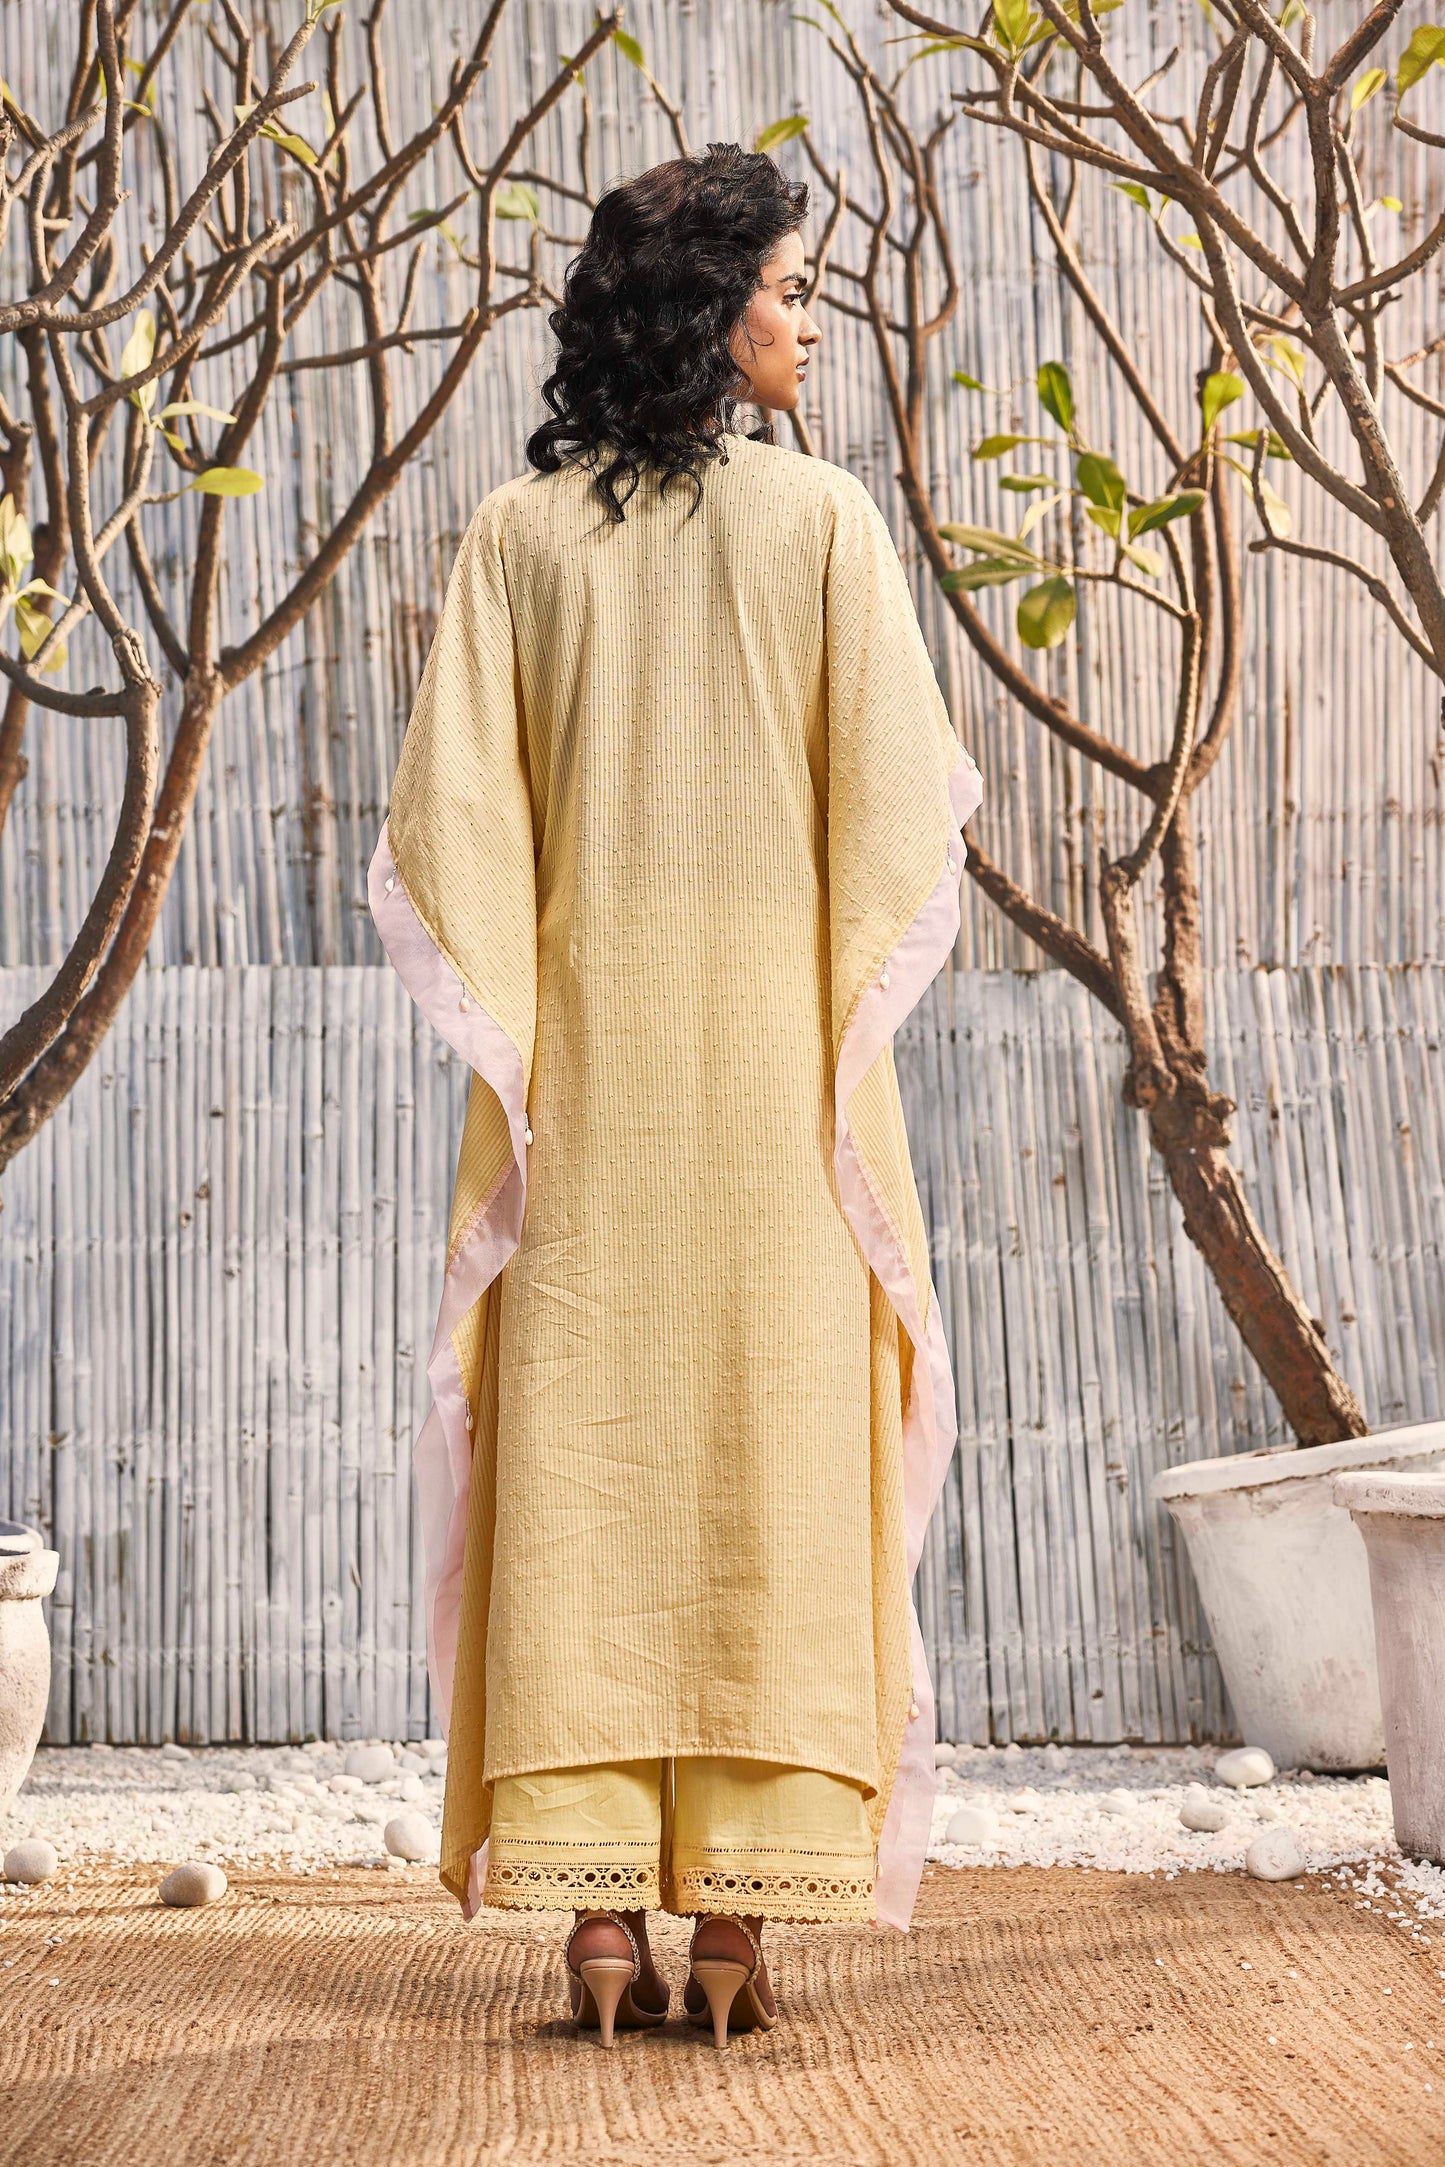 Breezy Cotton Kaftan with Palazzo - Set of 2 - Yellow at Kamakhyaa by Charkhee. This item is Best Selling, Cotton, Cotton Satin, Dobby Cotton, Festive Wear, For Mother, Indian Wear, Kurta Palazzo Sets, Natural, Regular Fit, Shores 23, Textured, Womenswear, Yellow